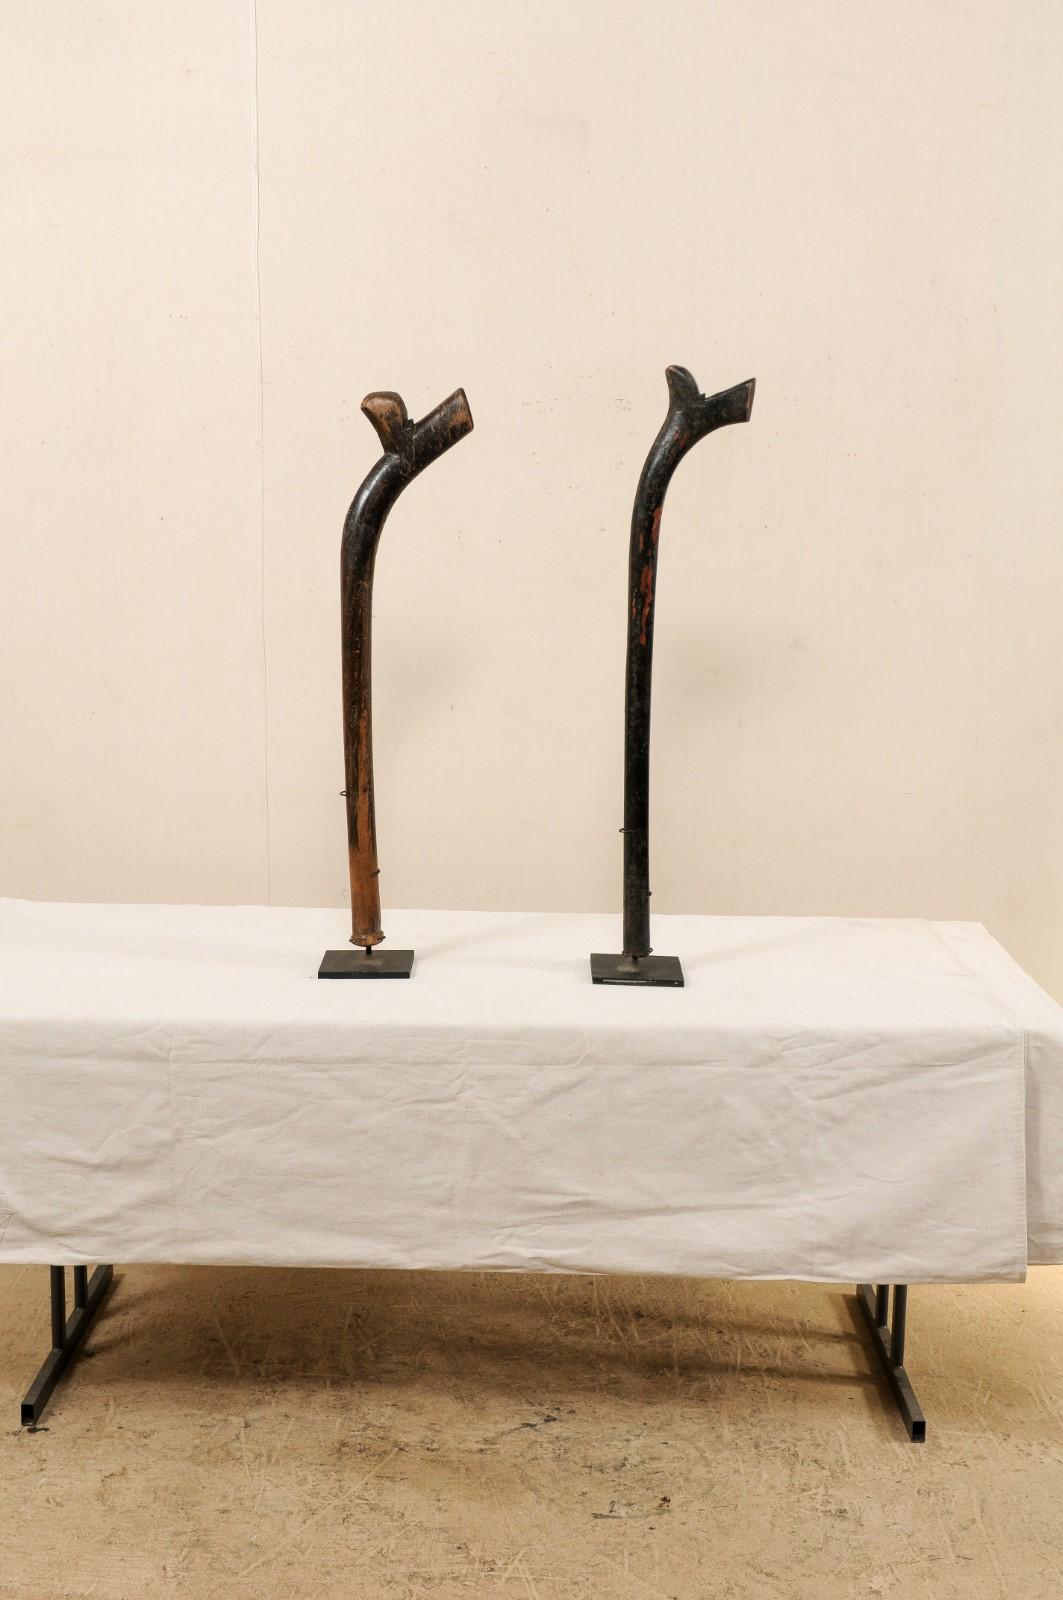 A pair of Kiakavo wooden clubs from the Fiji Islands on custom stands. These vintage tribal wood clubs, carved by stone, are a beautiful example of the distinctive double-headed Kiakavo war club, which is often referred to as a 